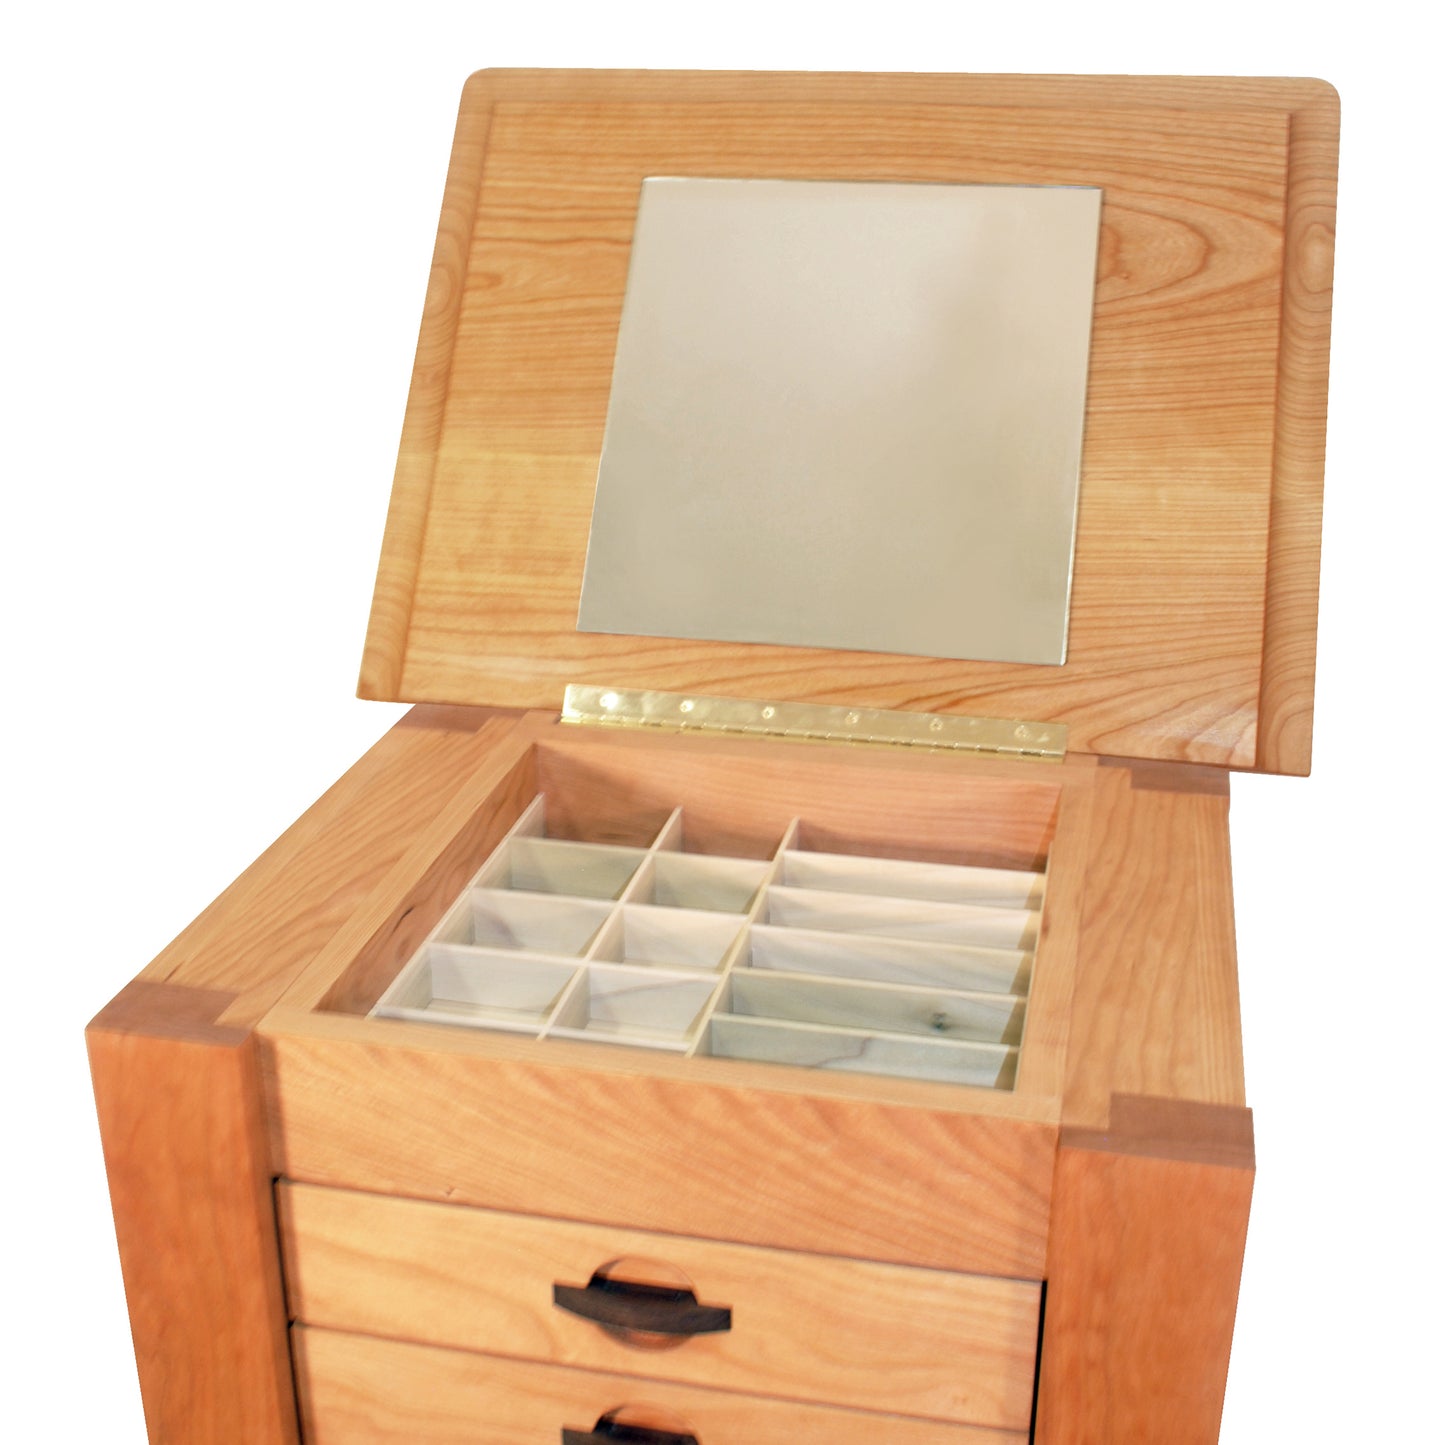 An open Maple Corner Woodworks Cherry Moon Jewelry Cabinet with multiple compartments and a mirror on the inside of the lid.